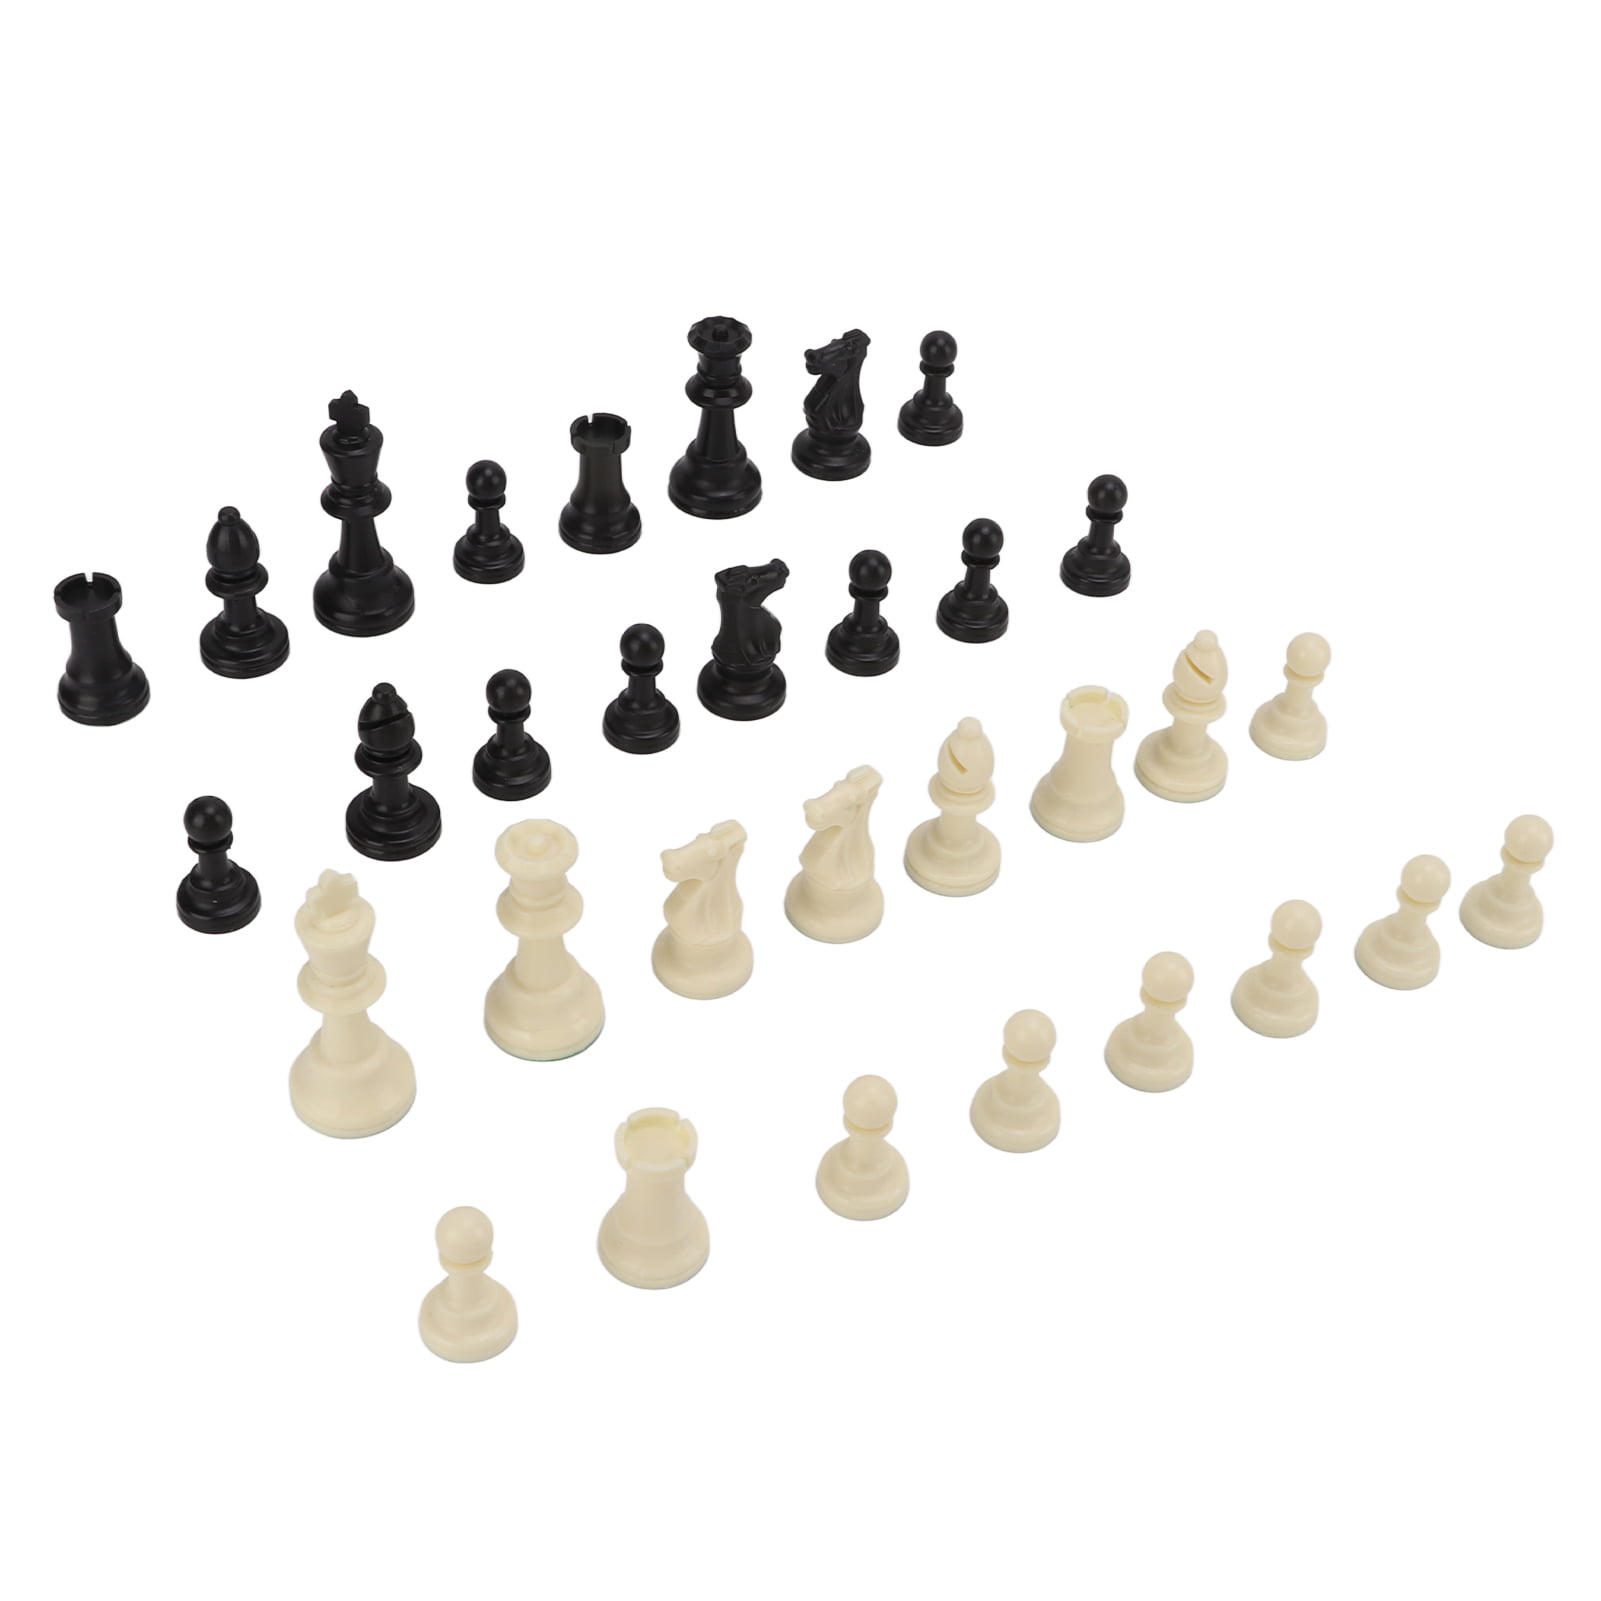 Standard Chess Pieces Set Plastic Chess Game 75mm King Gift without Board 